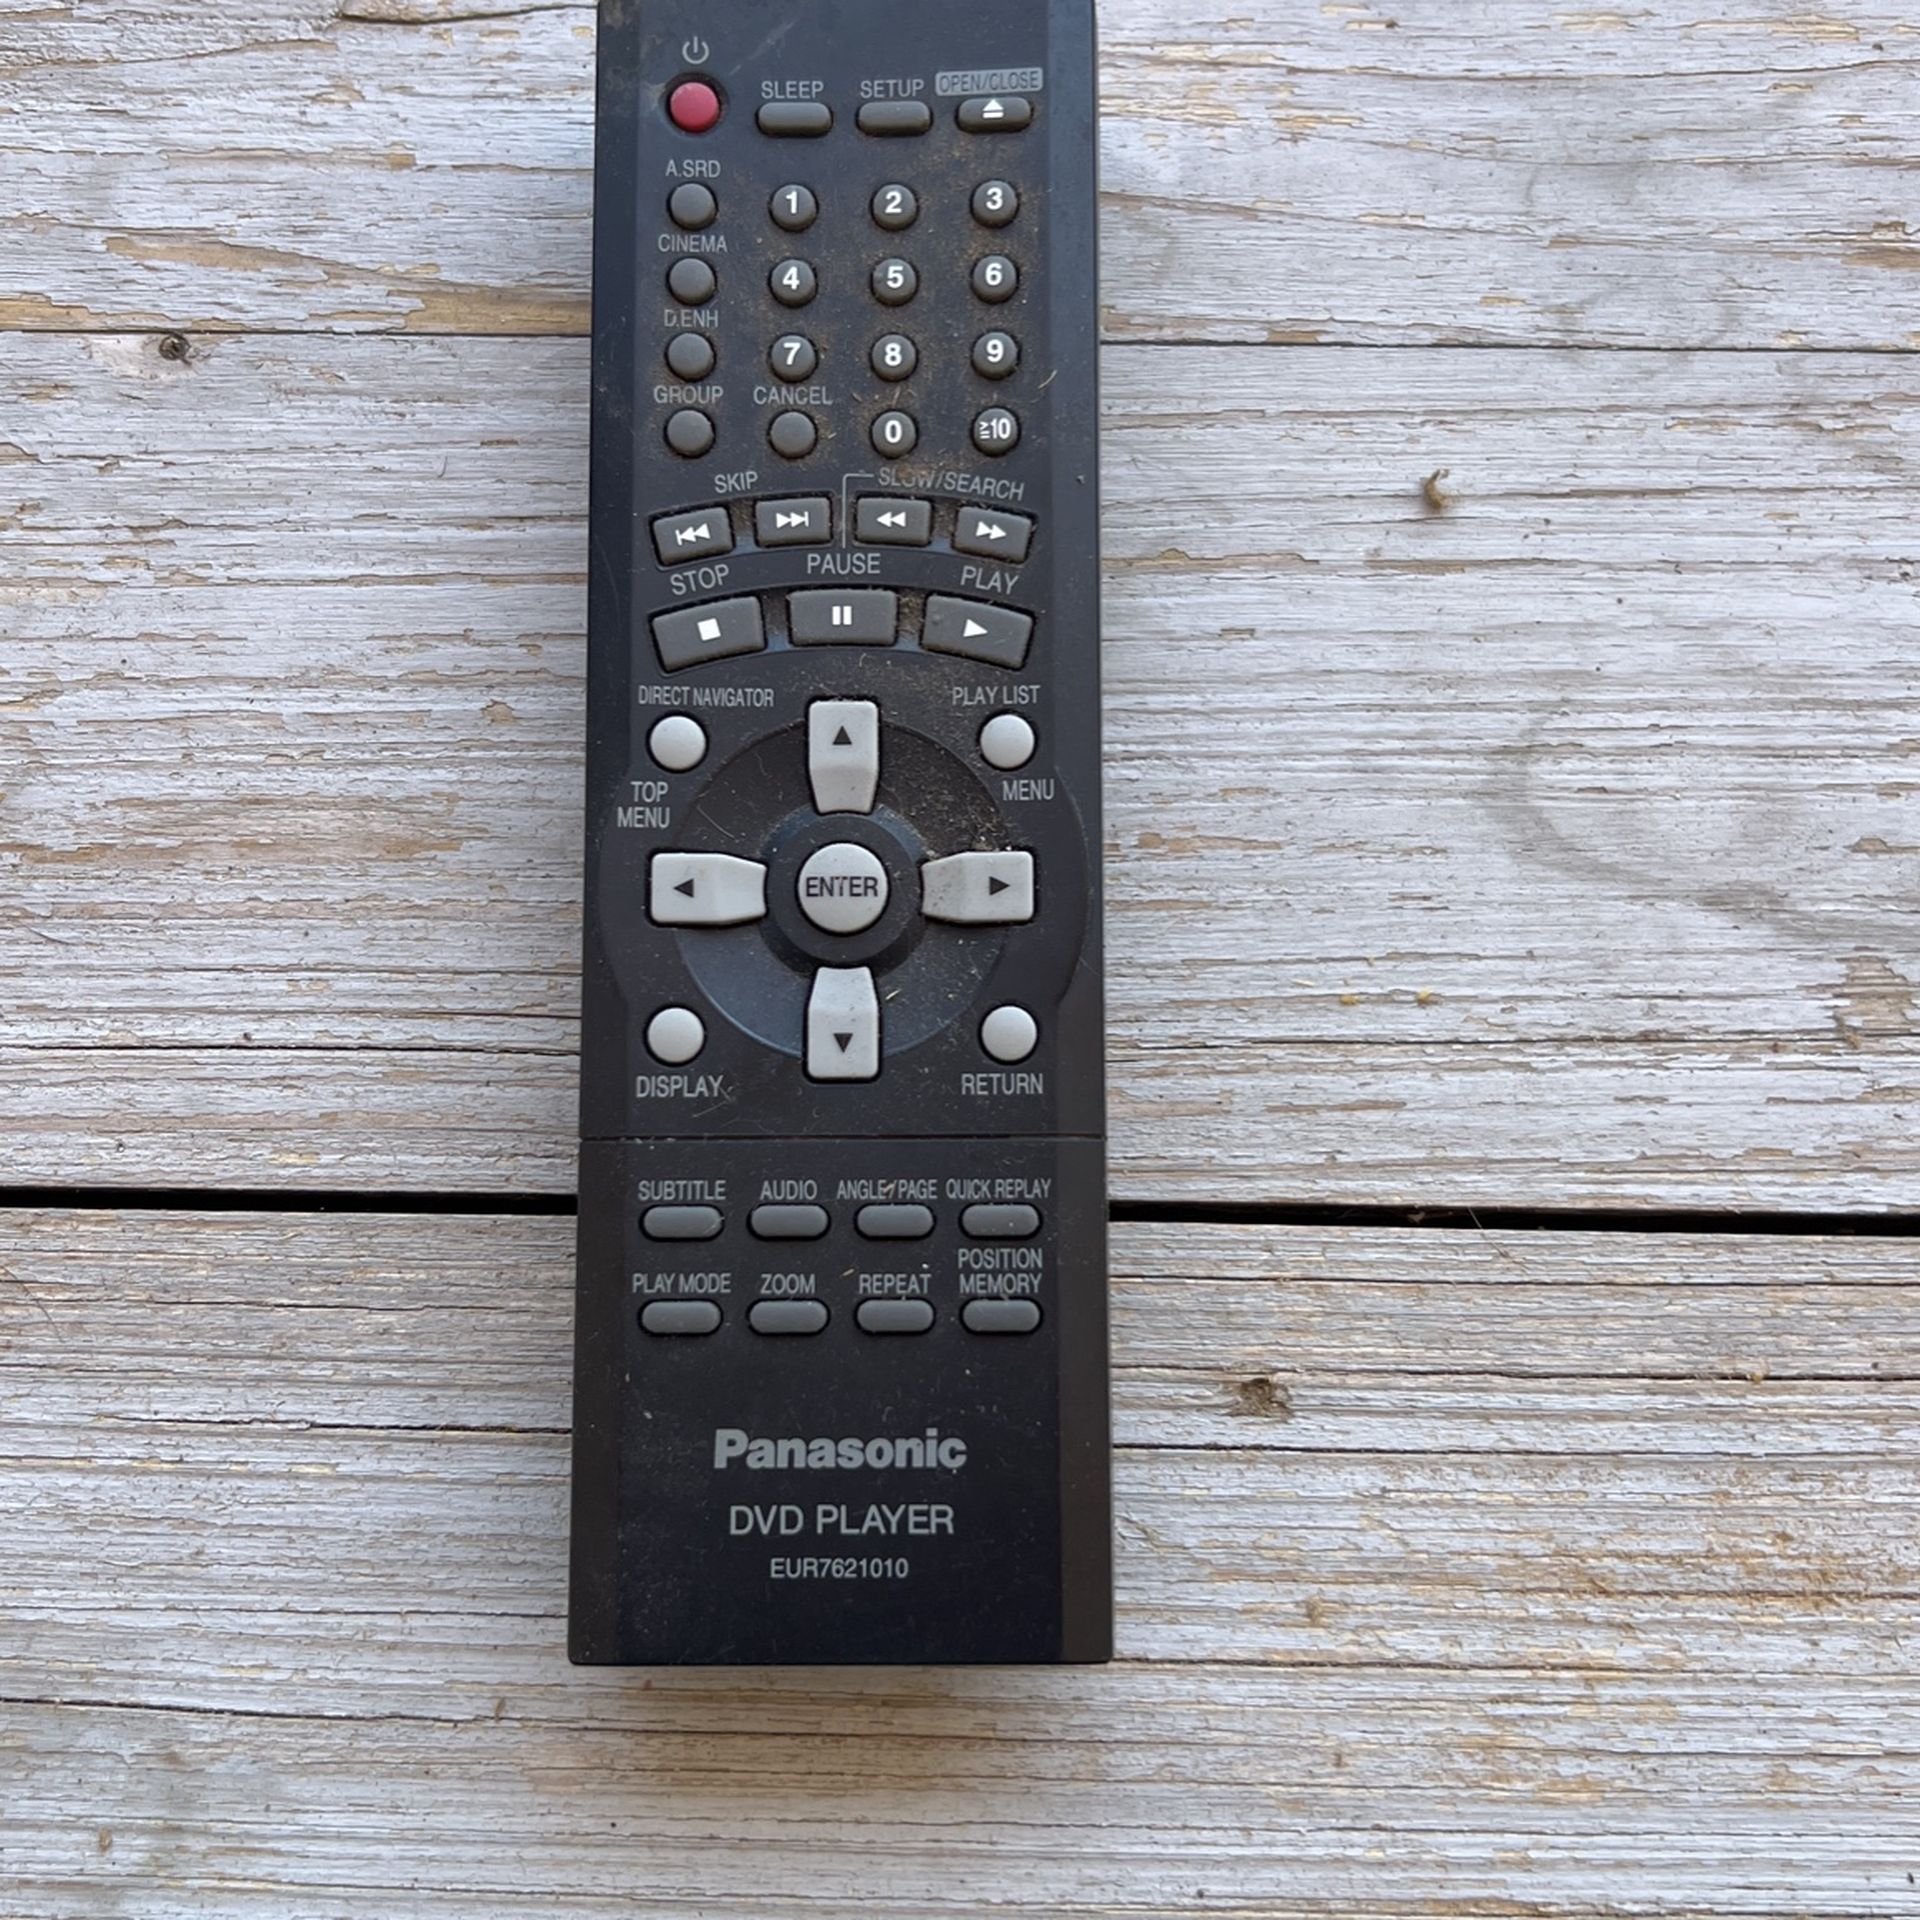 Panasonic DVD Player remote EUR(contact info removed)